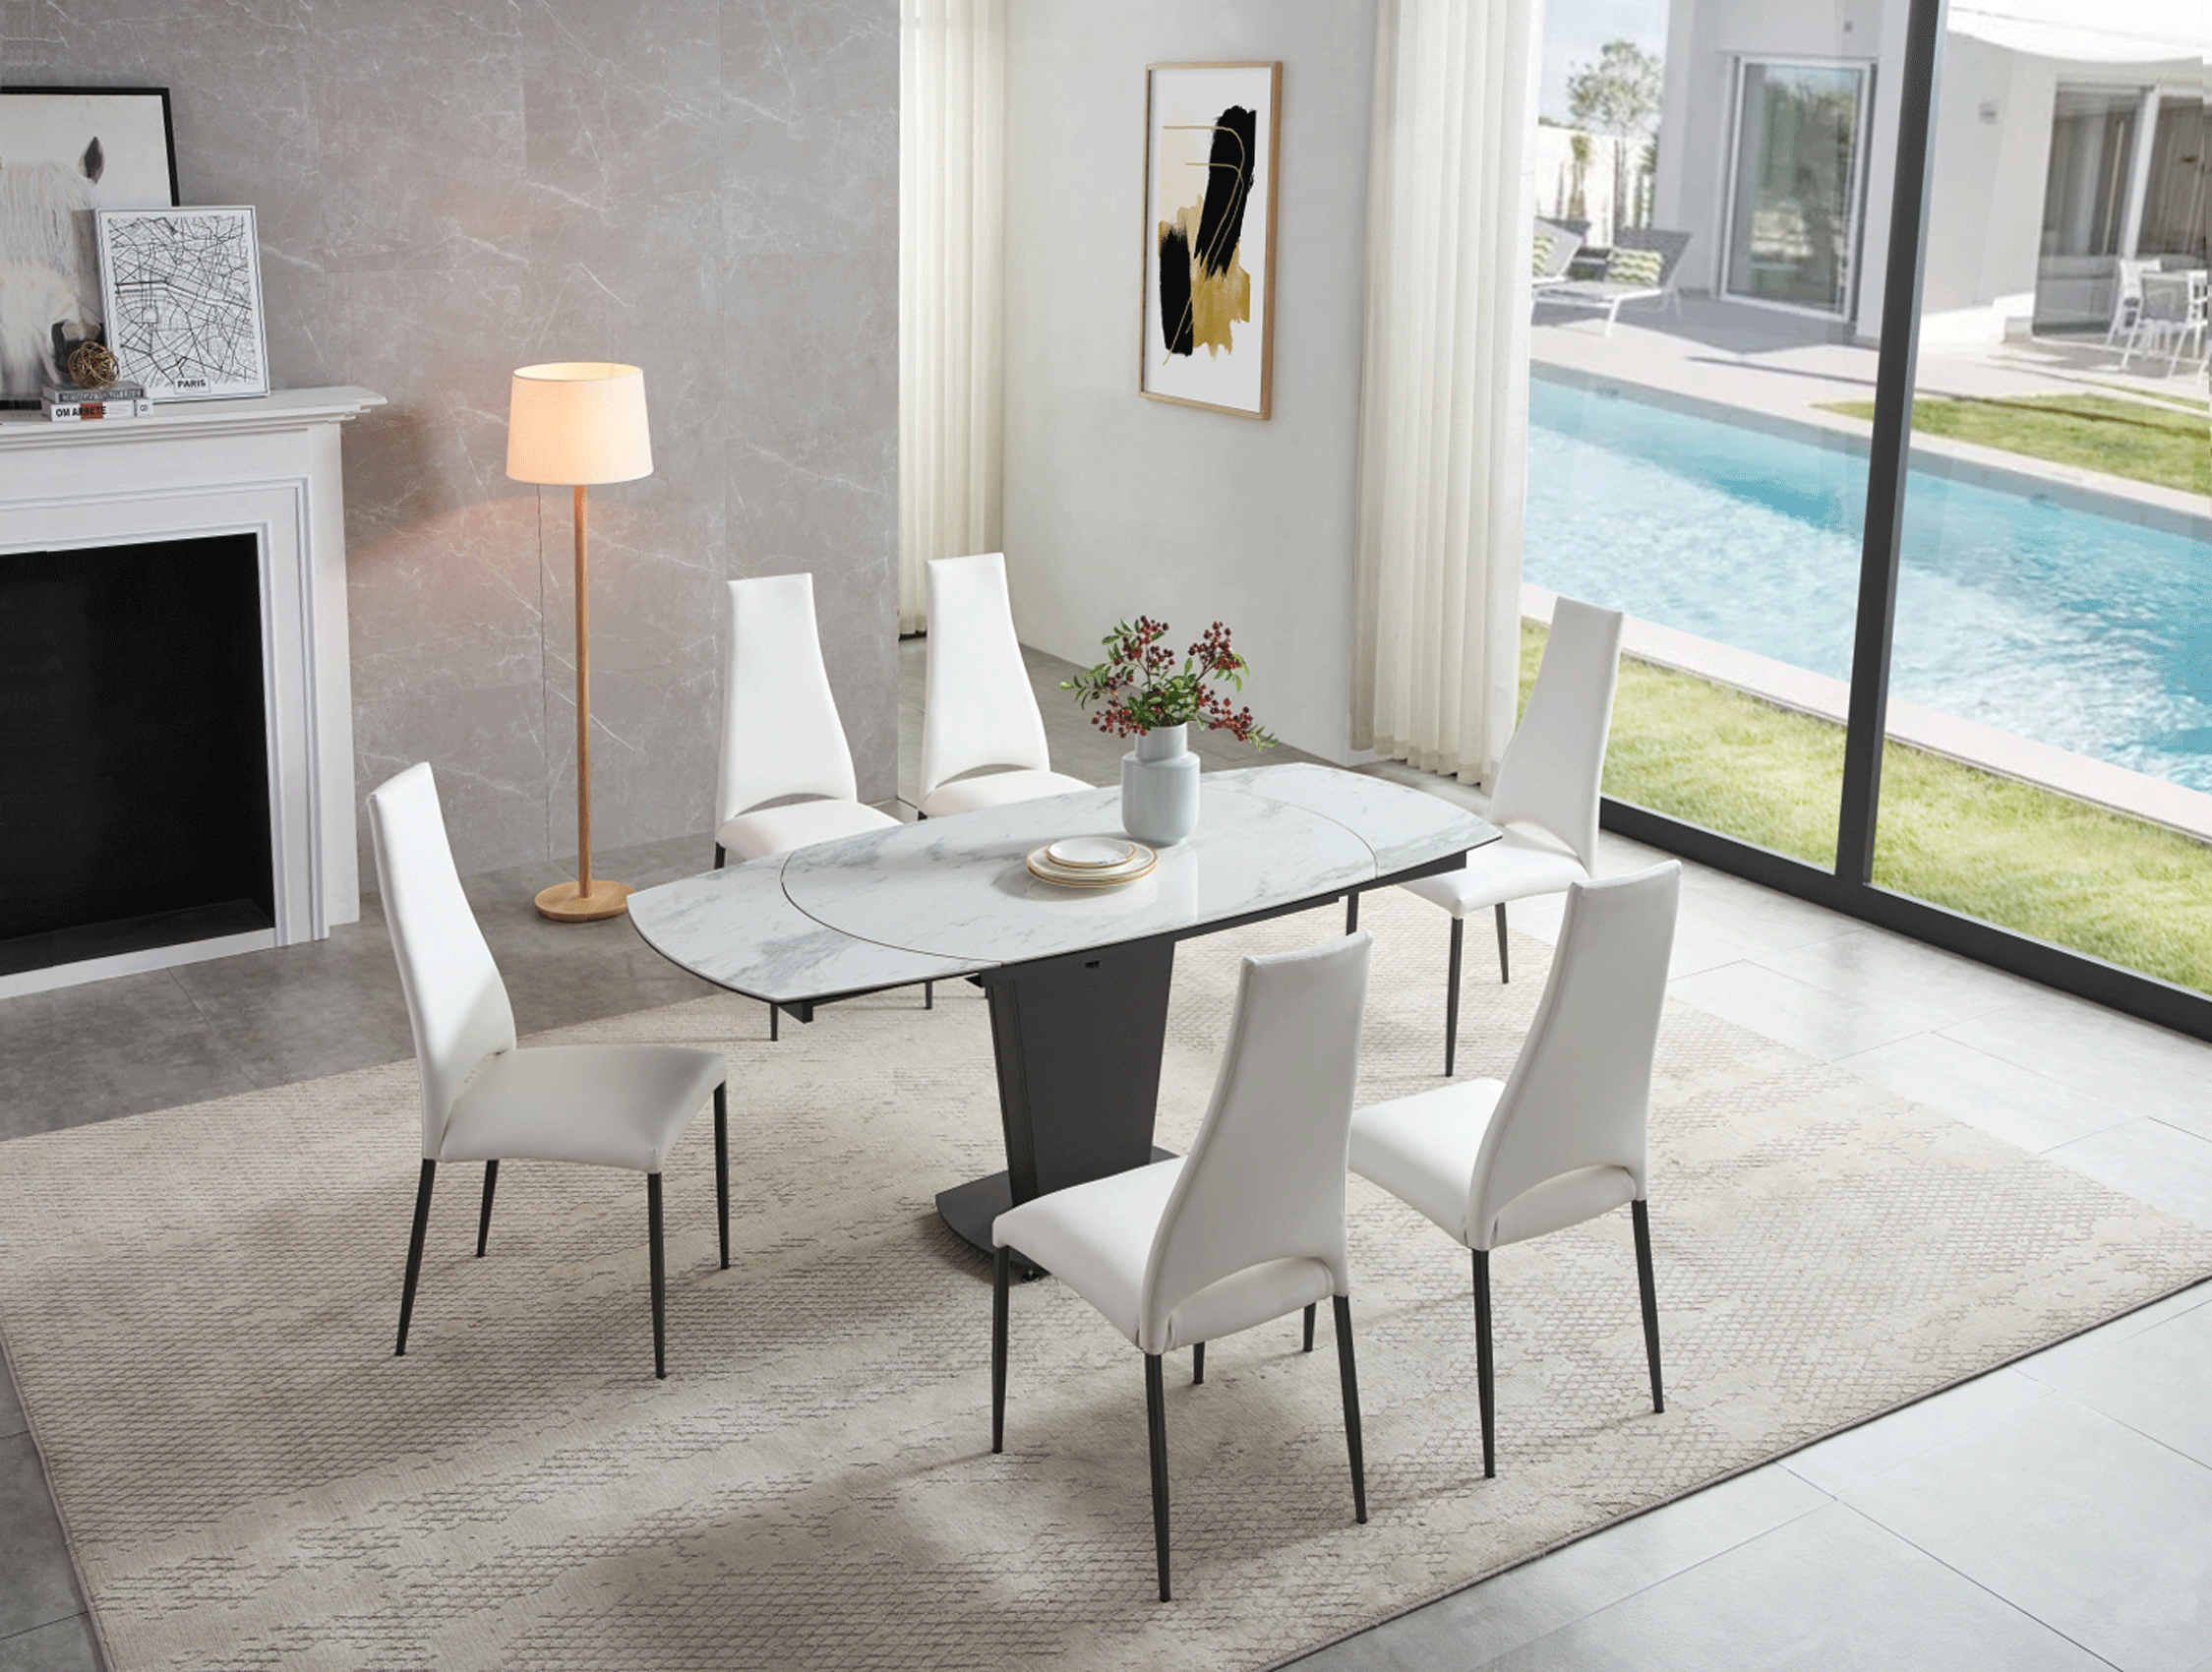 Dining Room Furniture Kitchen Tables and Chairs Sets 2417 Marble Table White with 3405 White Chairs